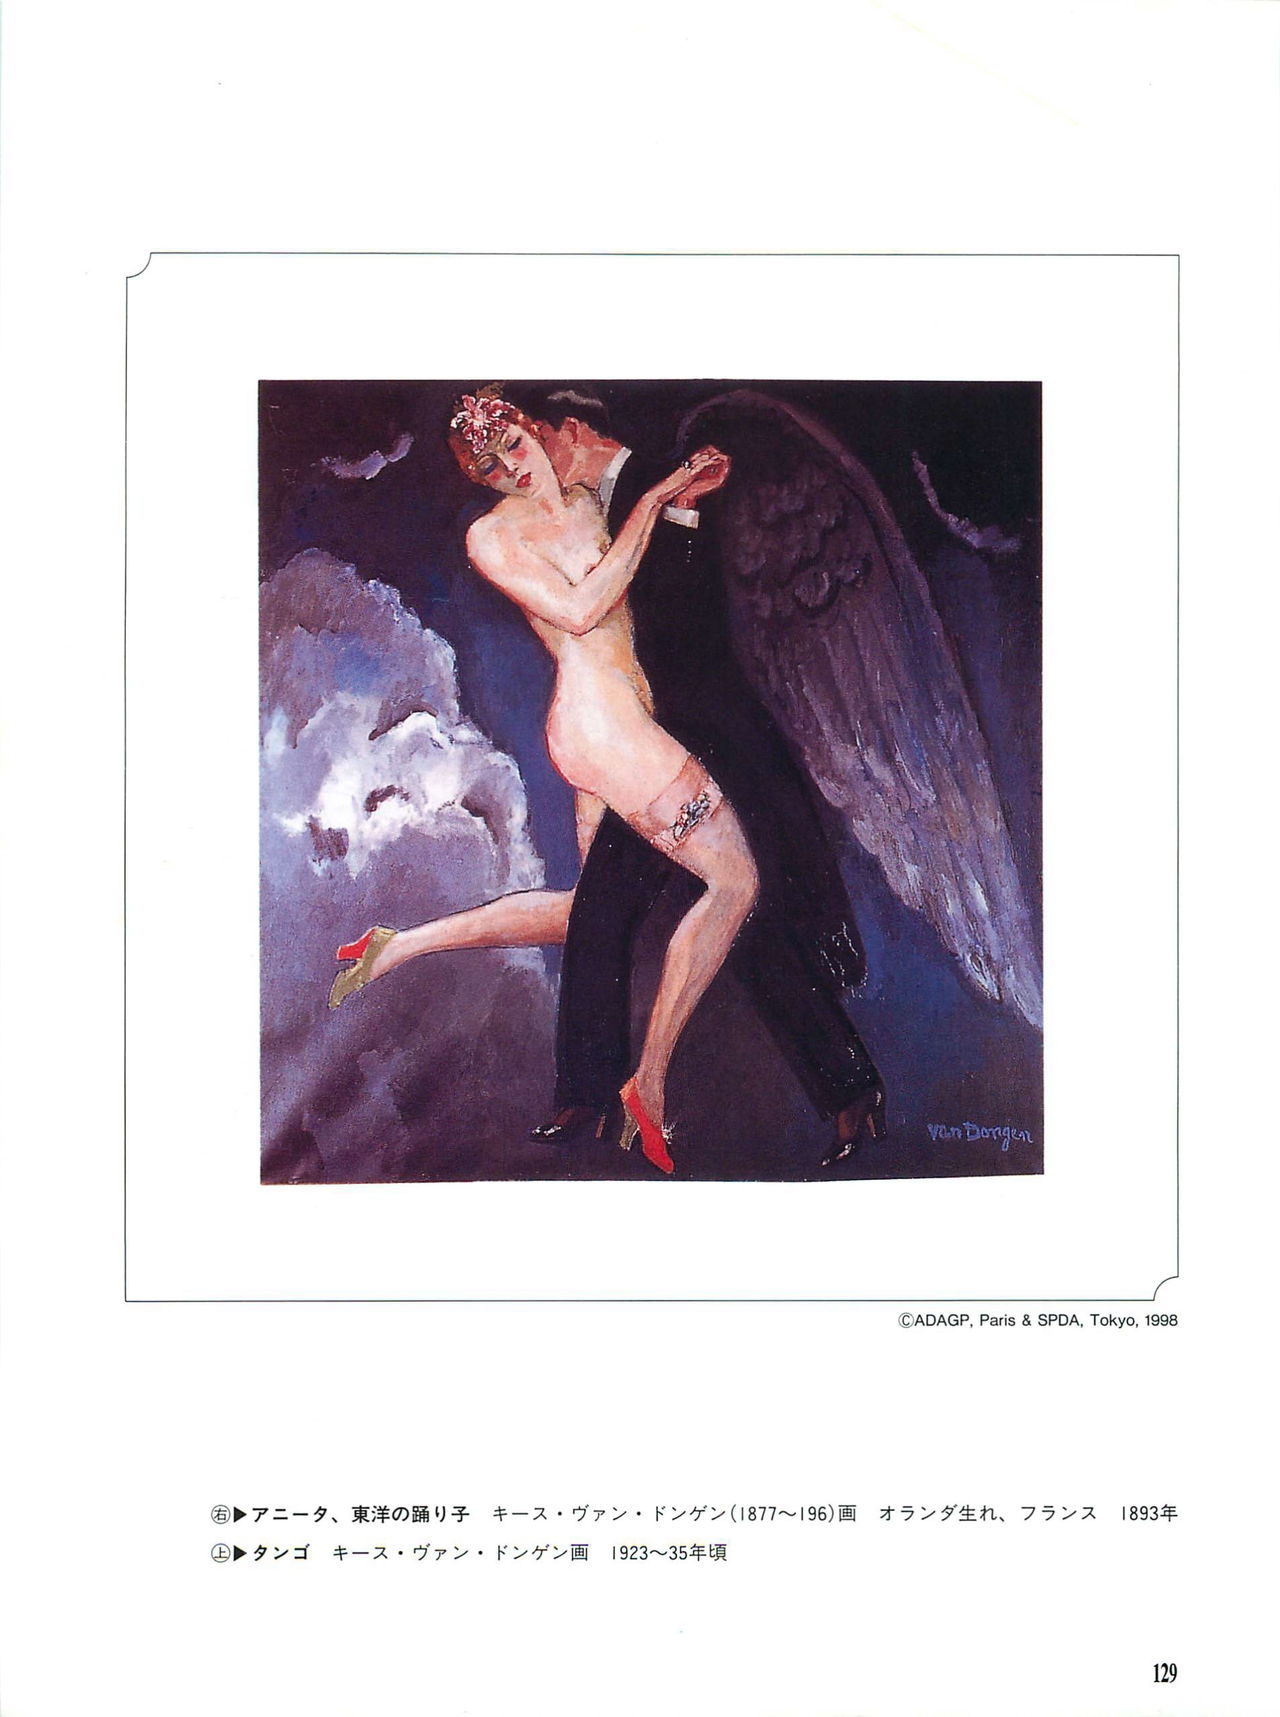 World of Eros: Erotic pieces of the masters 132